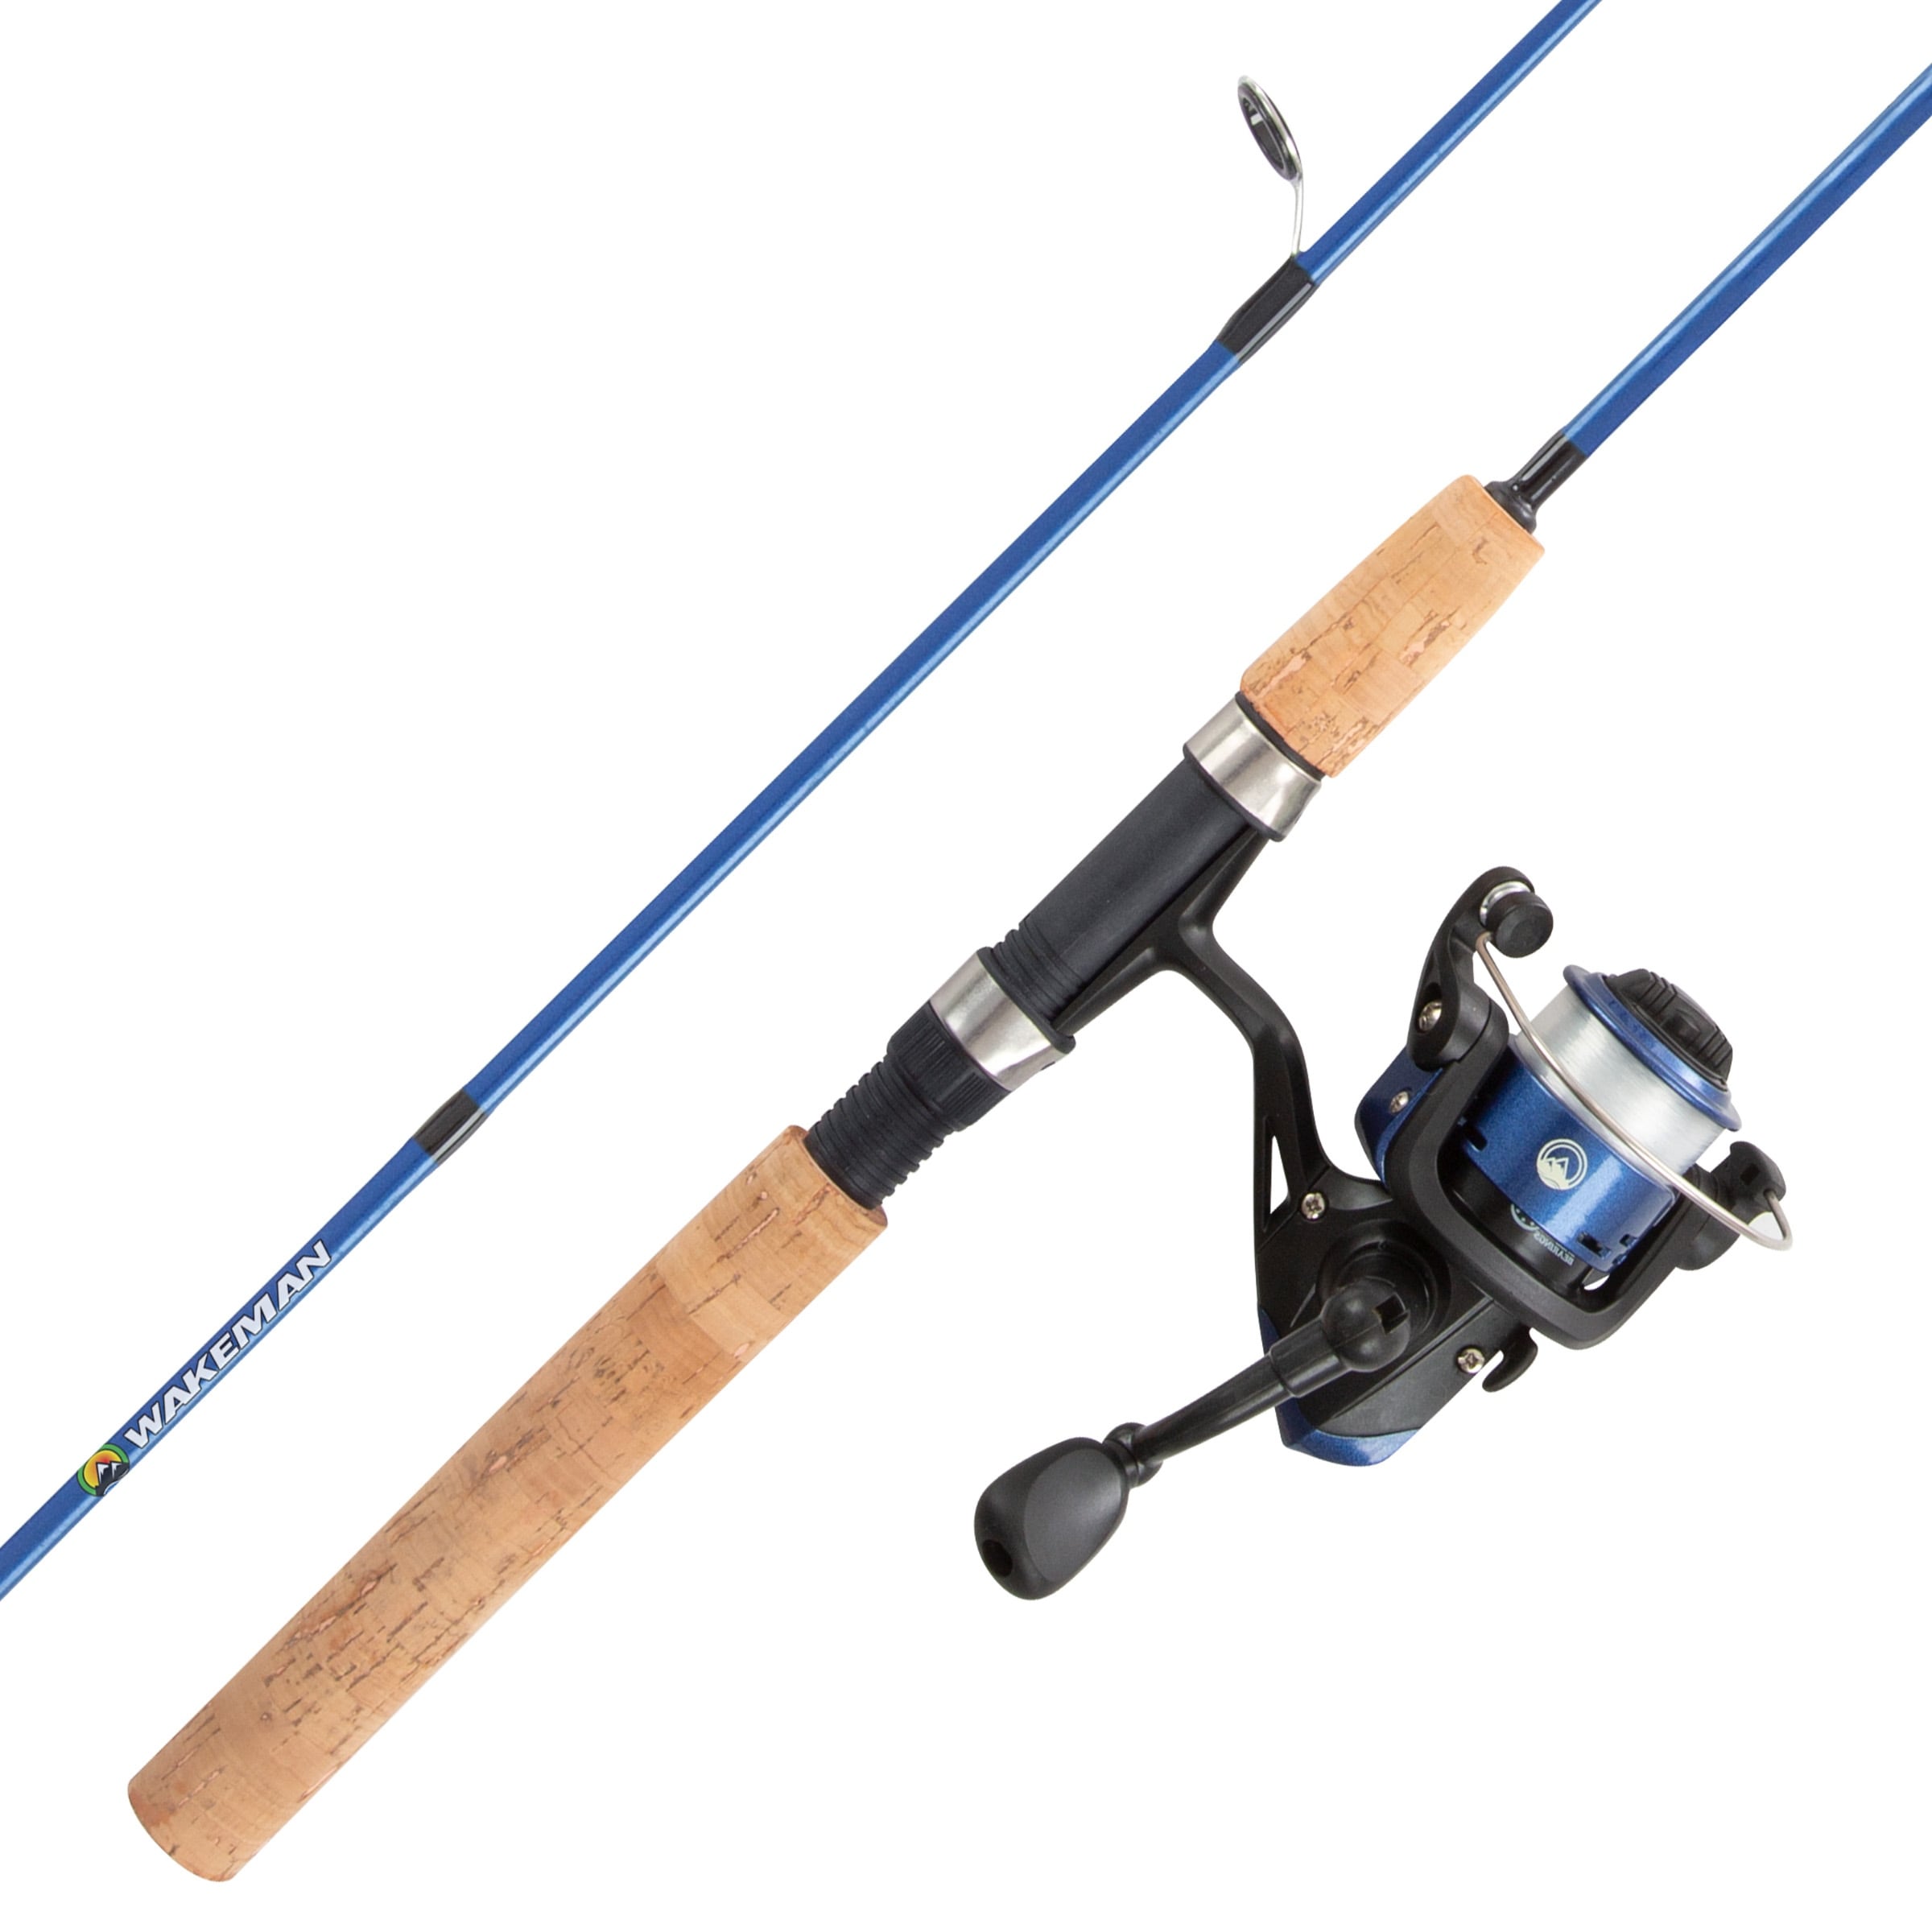 Youth Fishing Rod and Reel Combo - Kettle Series Fiberglass Pole by Wakeman (Blue) - Blue